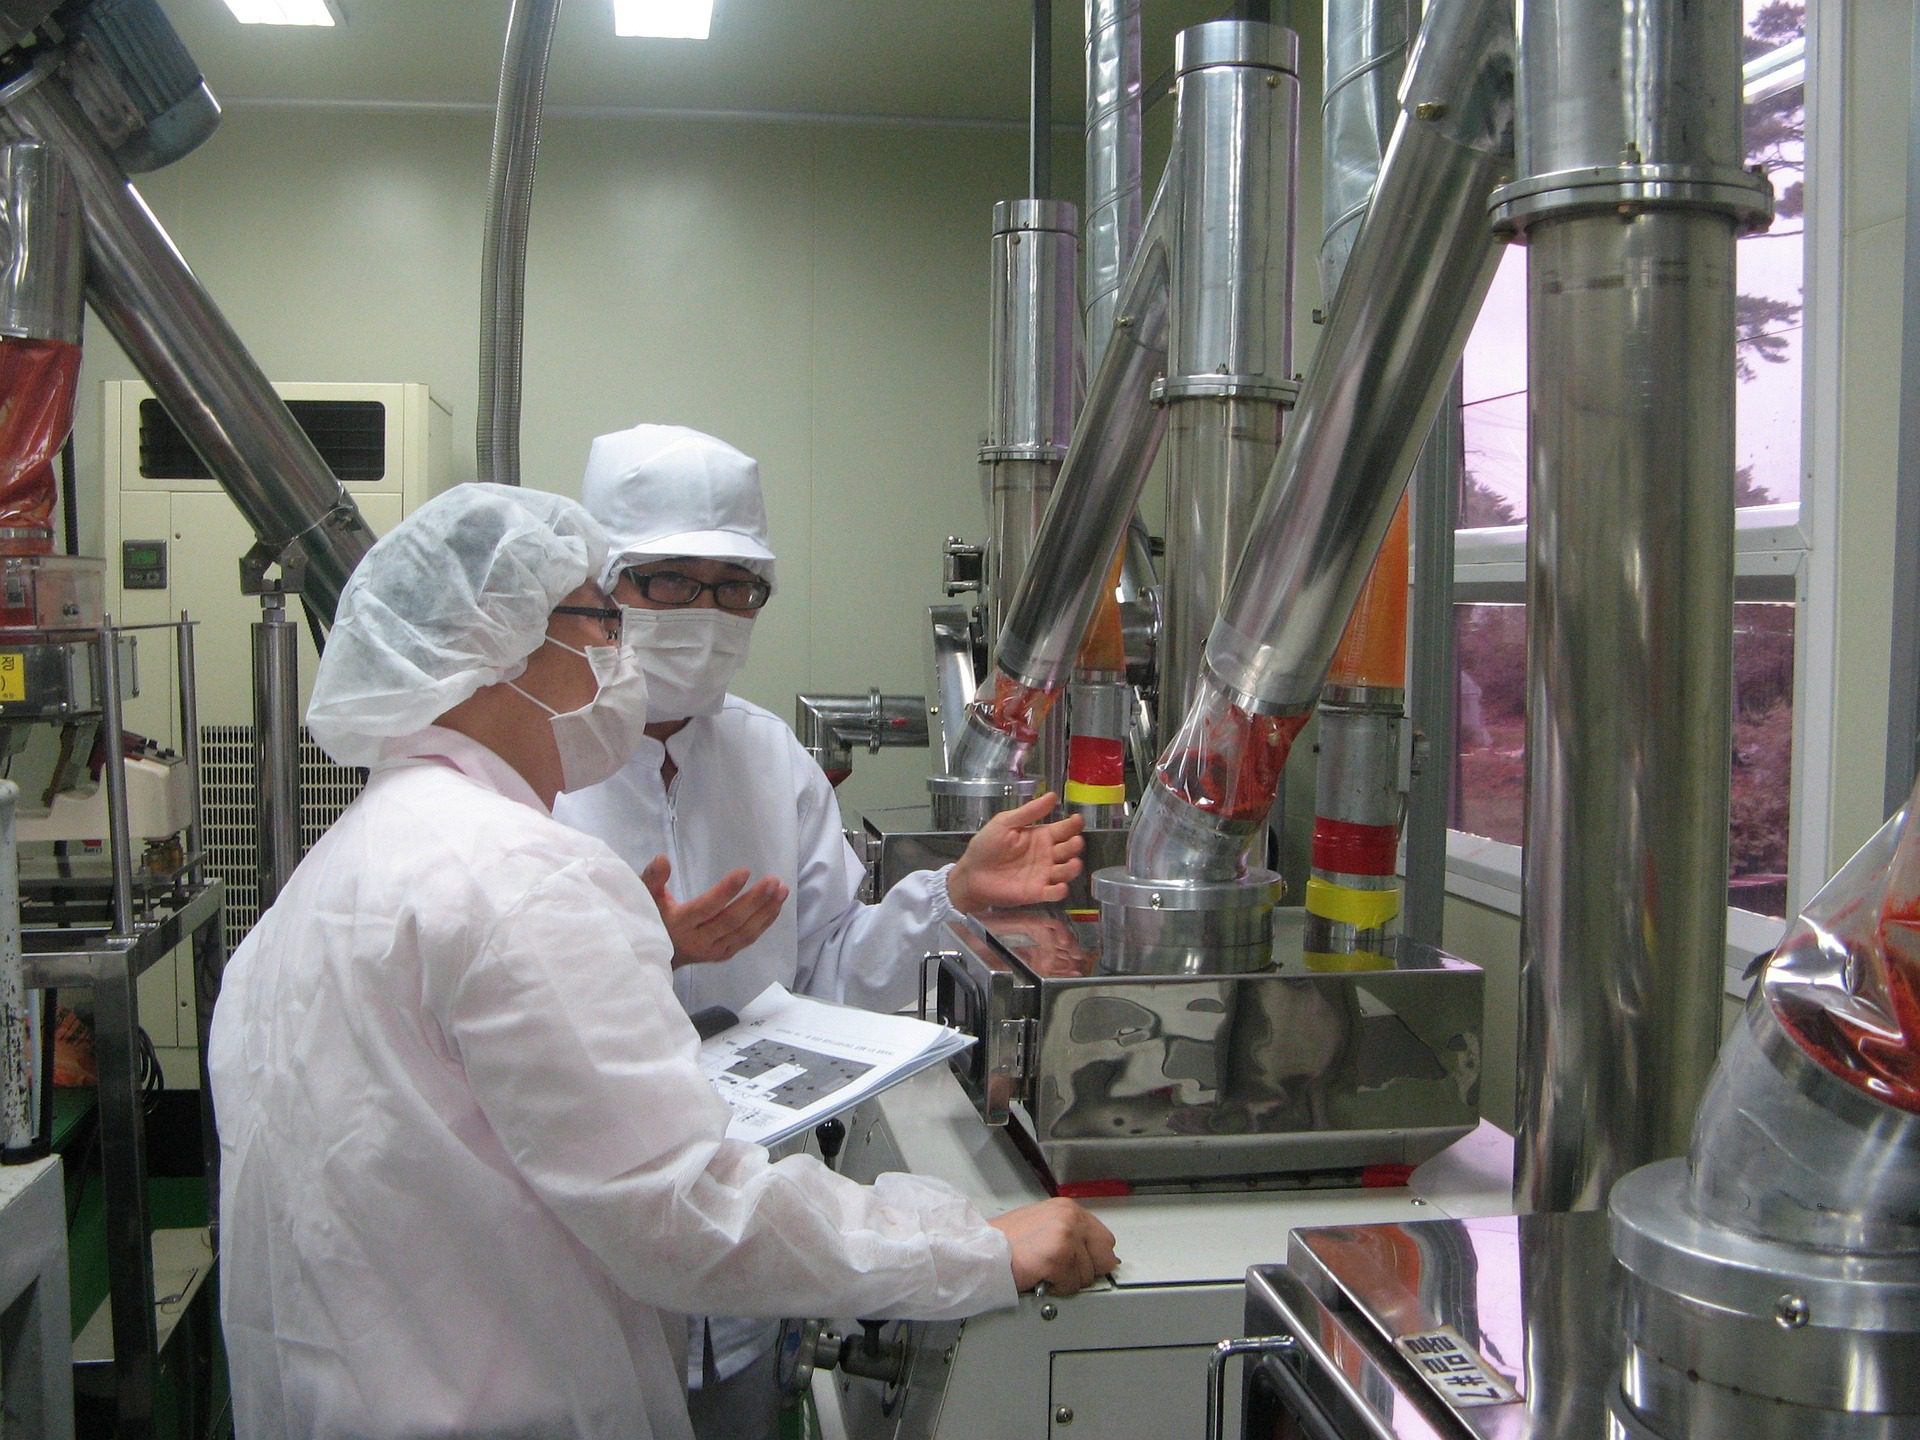 A couple of scientists inspecting a machine wearing mask